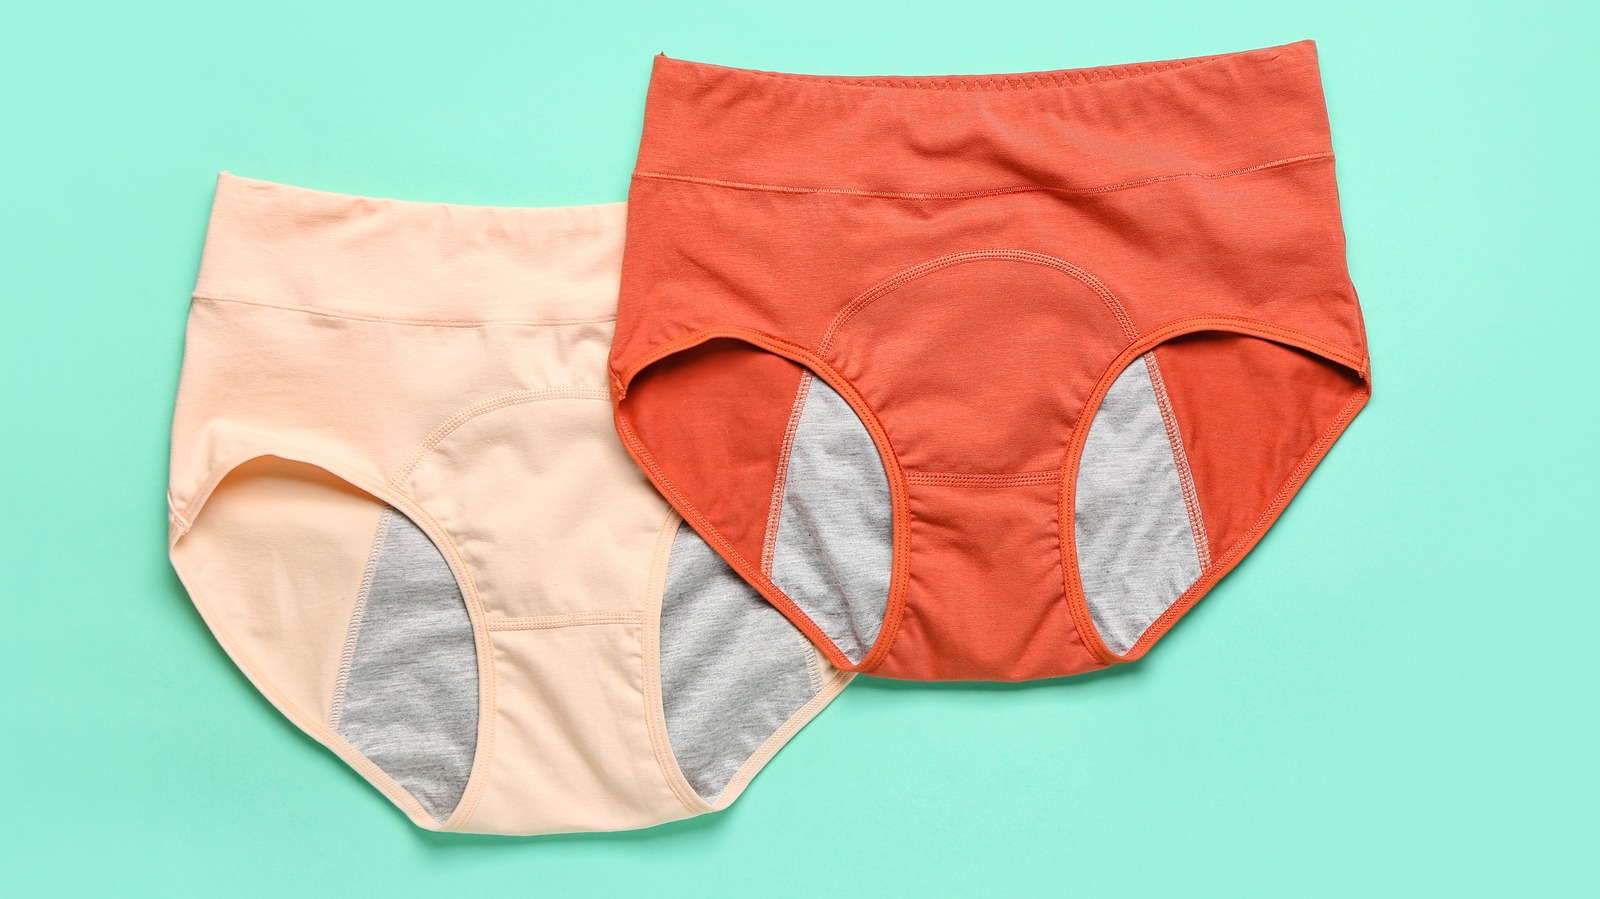 Bright Girl Health - Washing period underwear is easy! 💦 1. When you're  ready to change them, take them off and rinse them under COLD water to get  rid of the excess